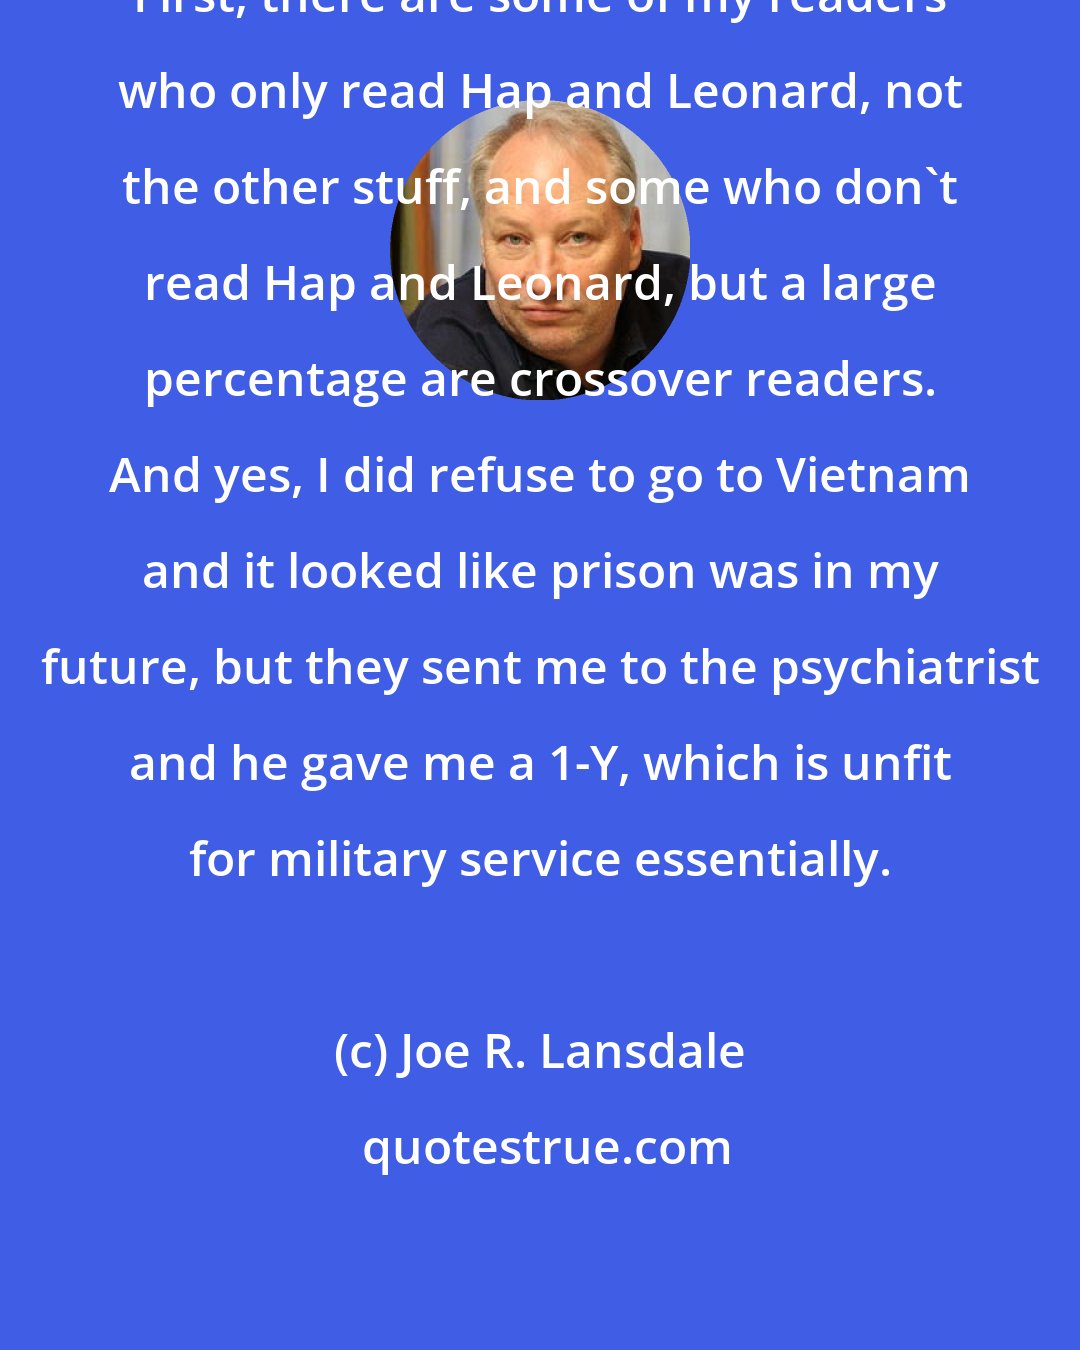 Joe R. Lansdale: First, there are some of my readers who only read Hap and Leonard, not the other stuff, and some who don't read Hap and Leonard, but a large percentage are crossover readers. And yes, I did refuse to go to Vietnam and it looked like prison was in my future, but they sent me to the psychiatrist and he gave me a 1-Y, which is unfit for military service essentially.